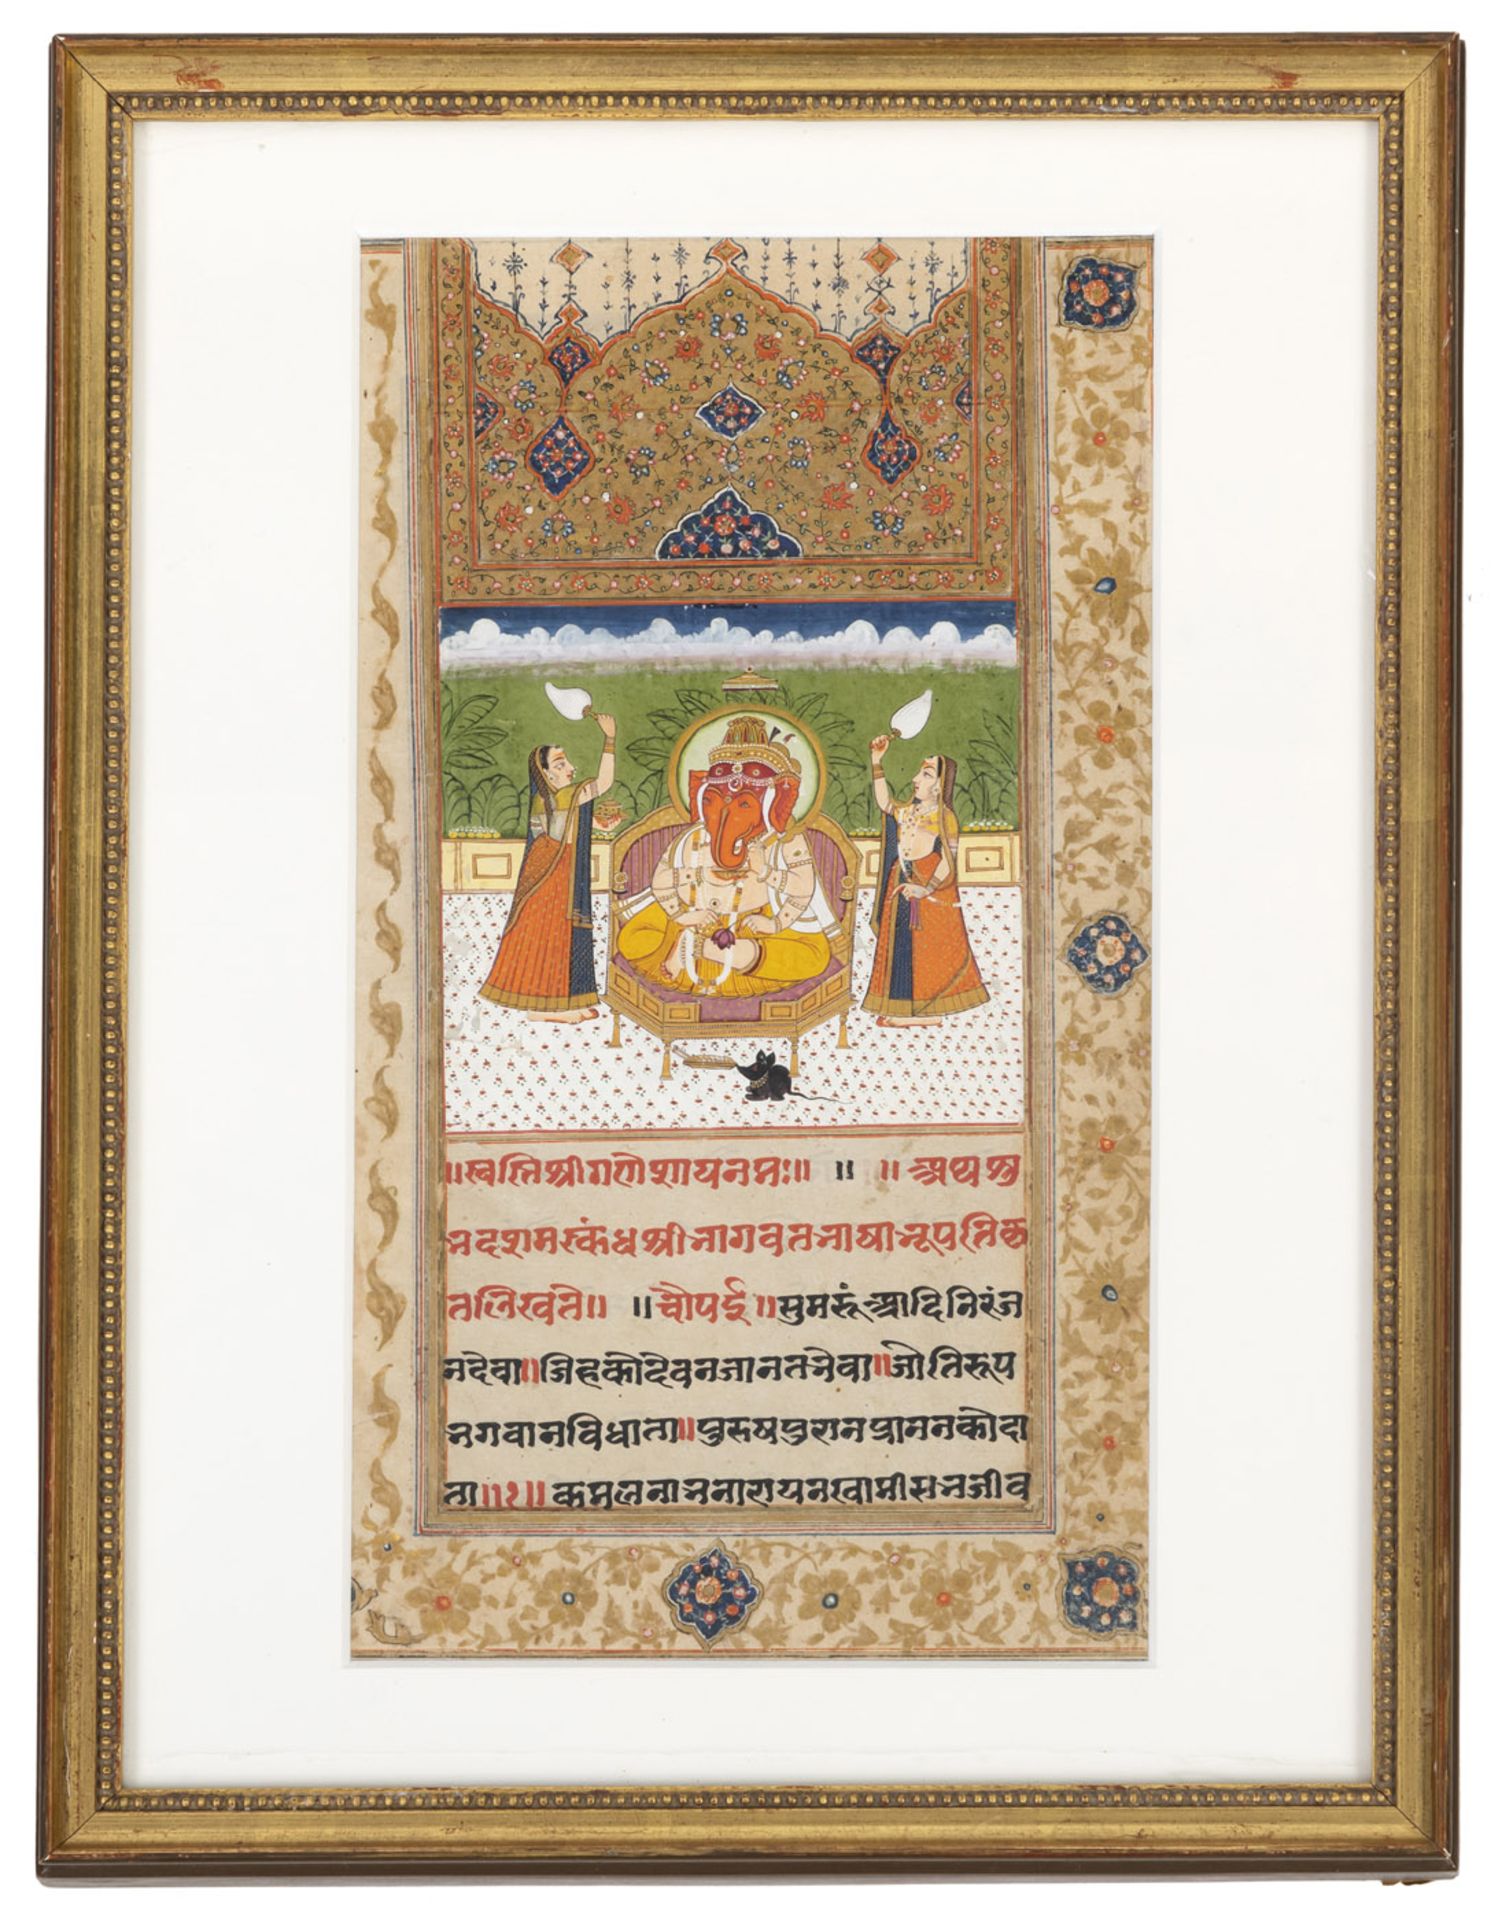 TWO POLYCHROME GOUACHE PAINTINGS DEPICTING GANESHA AND HANUMAN WITH KRISHNA - Image 2 of 3